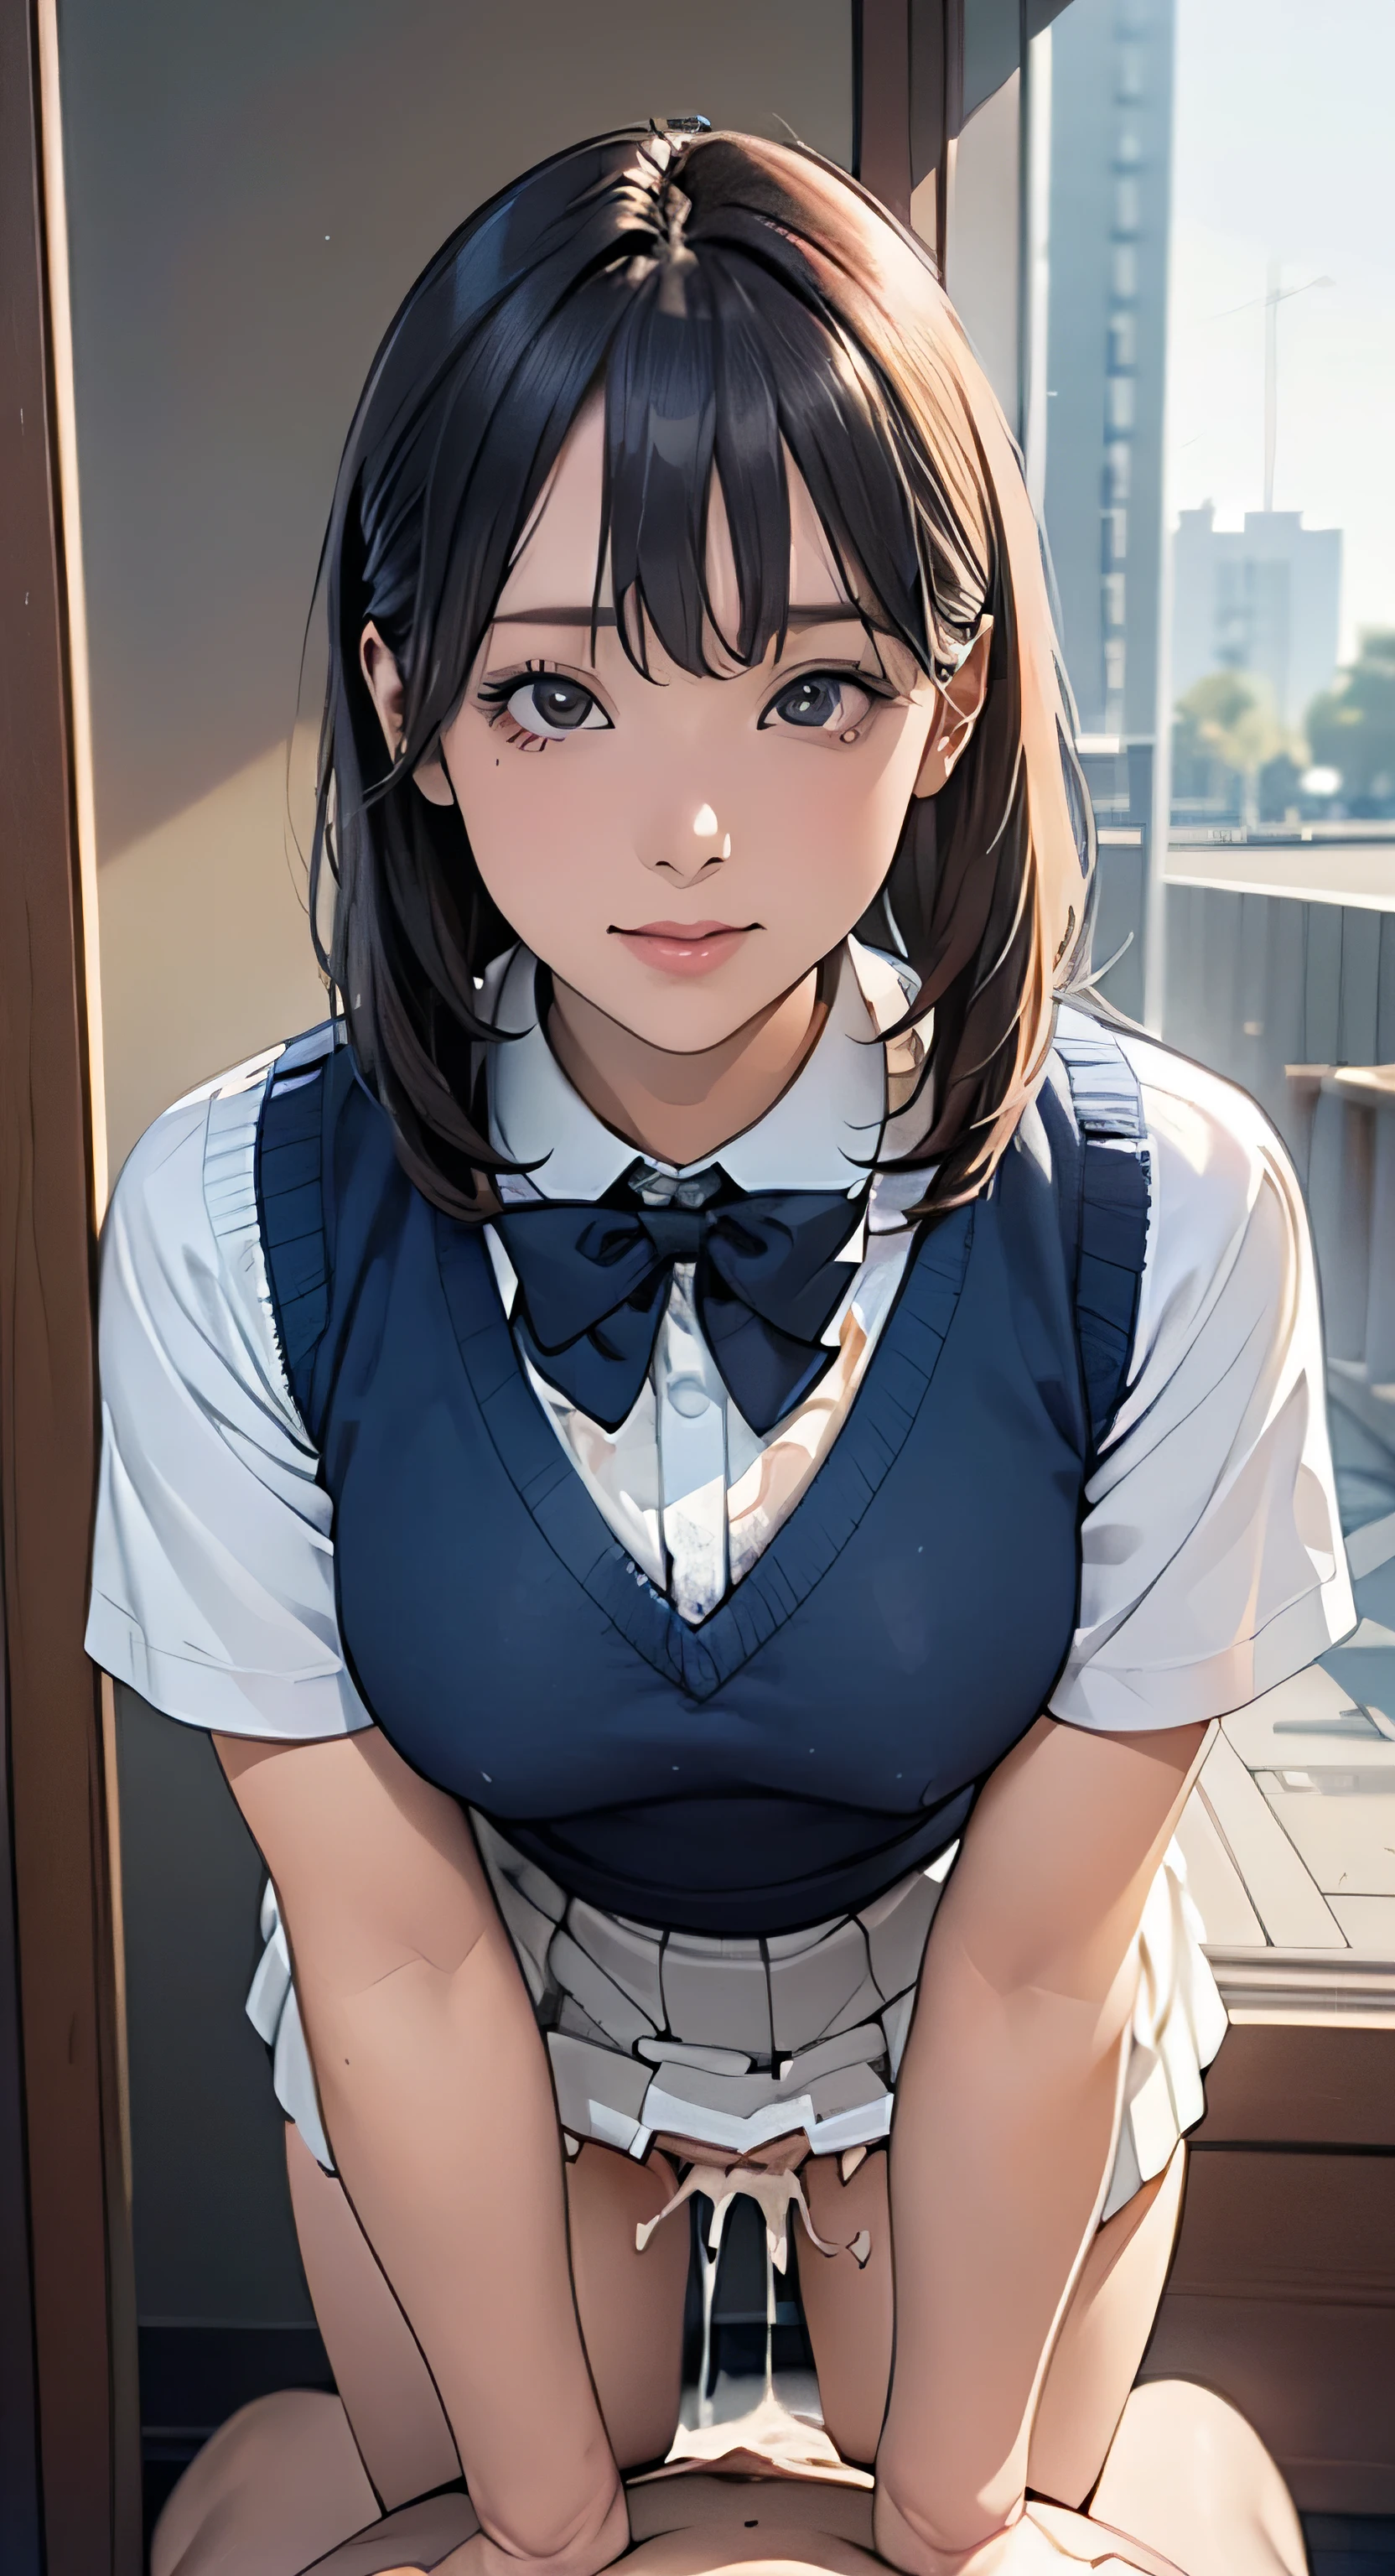 (masterpiece:1.2, highest quality), (realistic, photorealistic:1.4), beautiful illustrations, (natural side lighting, movie lighting),
looking at the viewer, Front view, 1 girl, English, high school girl, 15 years old, perfect face, Cute symmetrical face, shiny skin, asymmetrical bangs, Big eyes, droopy eyes, long eyelashes chest), thin, 
beautiful hair, beautiful face, fine and beautiful eyes, beautiful clavicle, beautiful body, beautiful breasts, beautiful thighs, beautiful feet, beautiful fingers, (vaginal sex:1.5), 
((fine fabric texture, Brown knitted vest, short sleeve white collar shirt, navy pleated skirt, Navy bow tie)), (cum in pussy:1.5), sex, erotic, (pale white skin:0.8), cum in pussy, hetero, mole, mole under eye, (Inside the flower shop), Are standing, (smile, Upper grade, open your mouth)